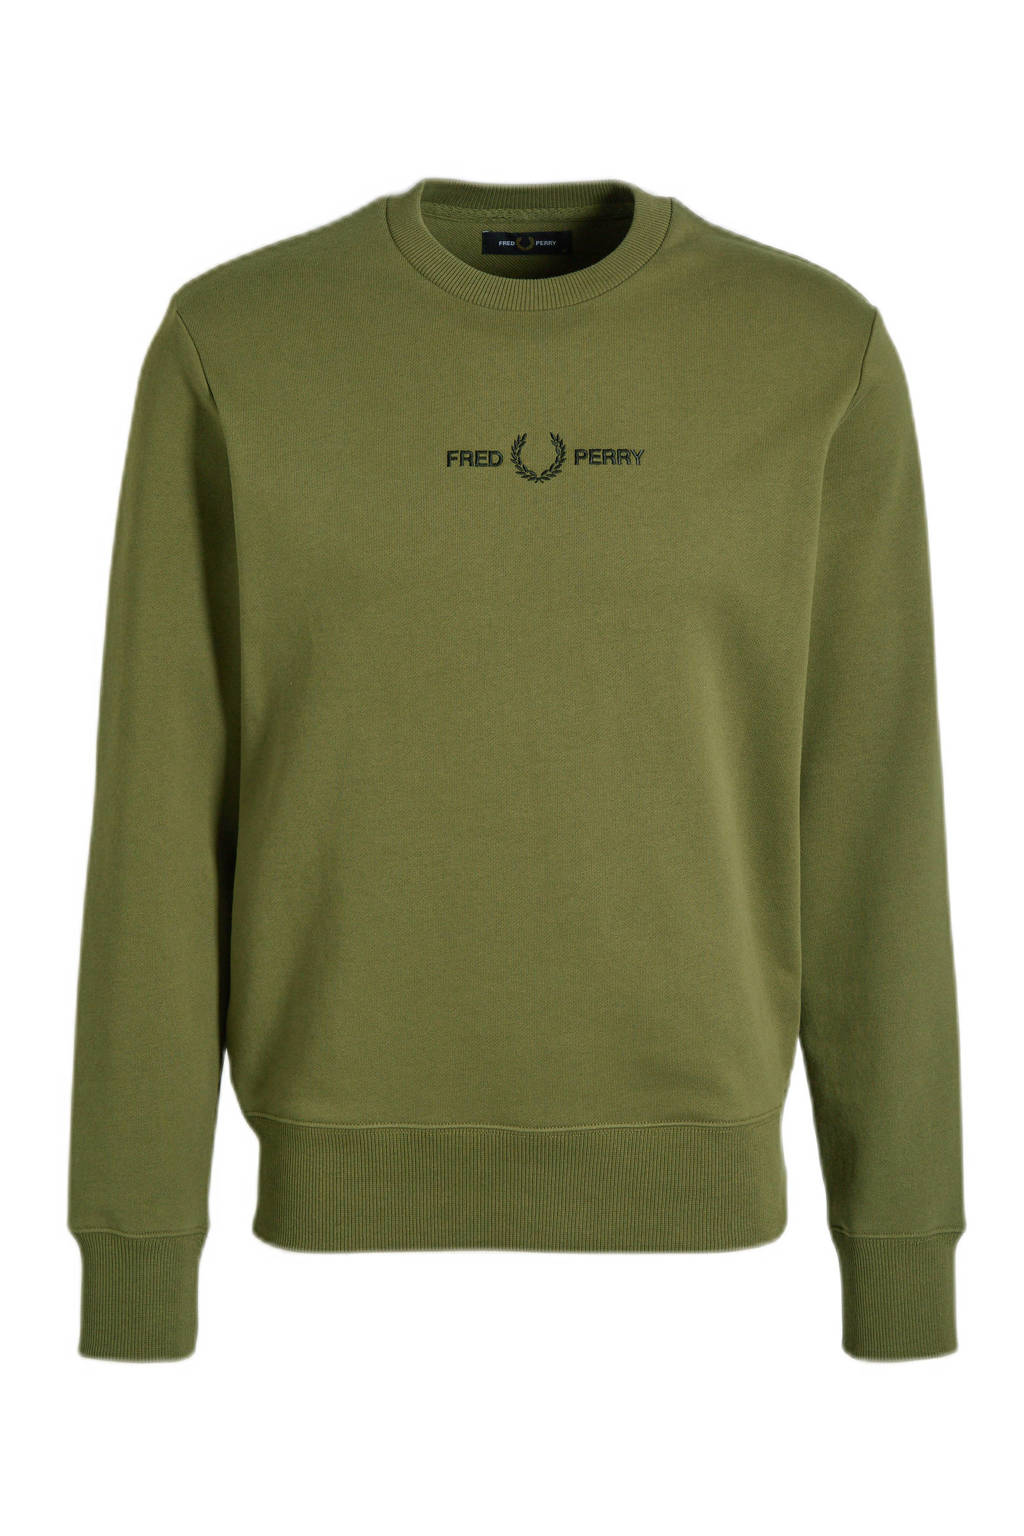 Fred Perry sweater met logo military green